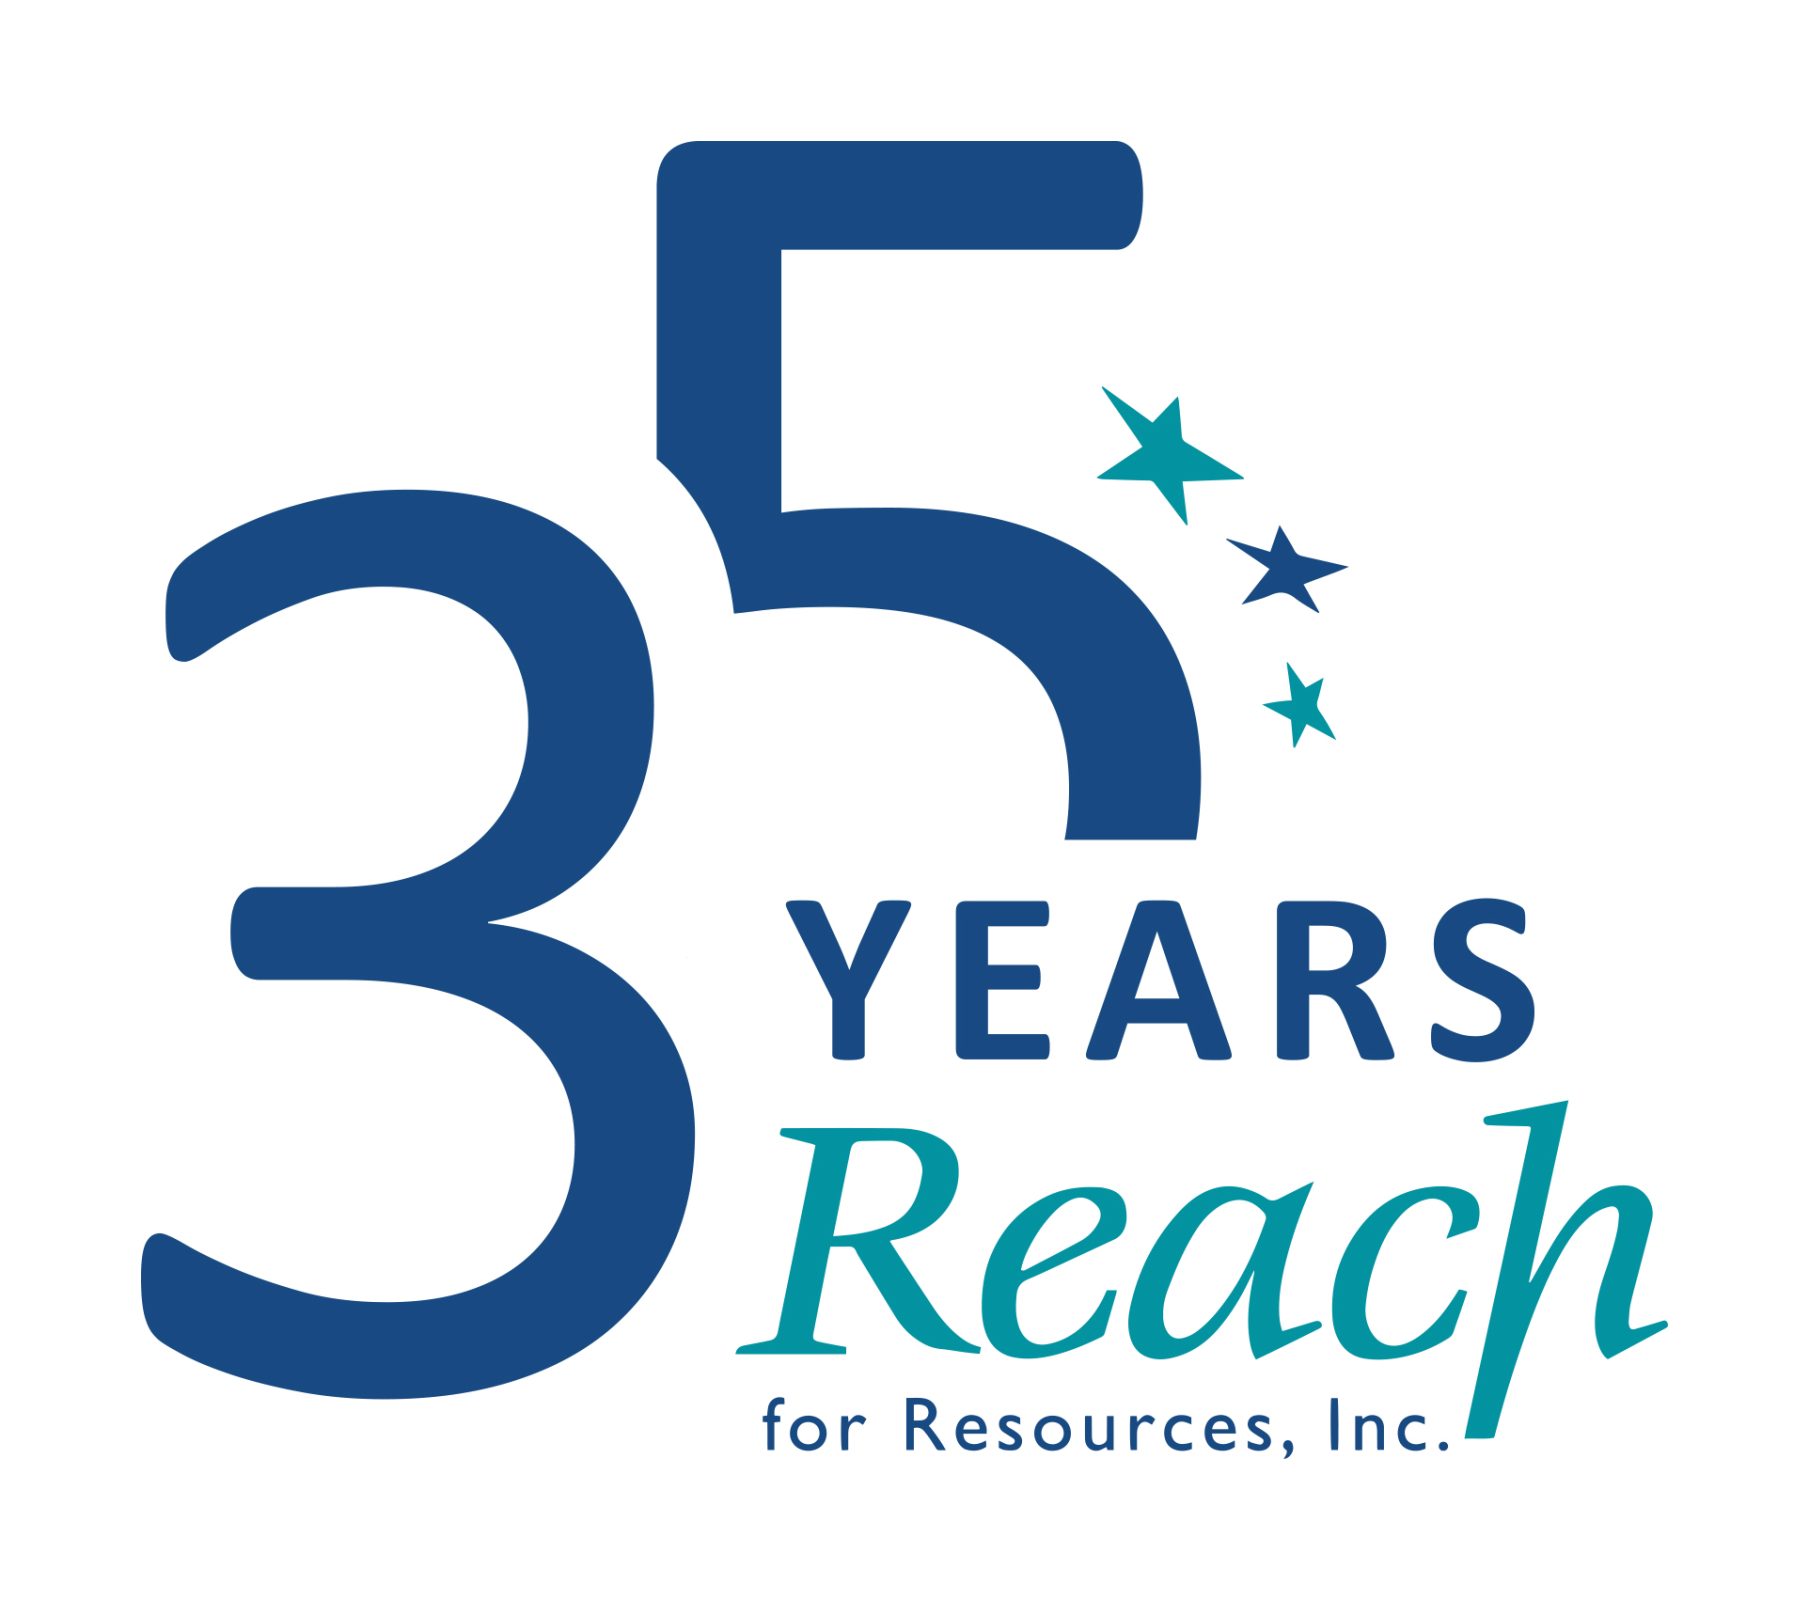 35 Years of Reach